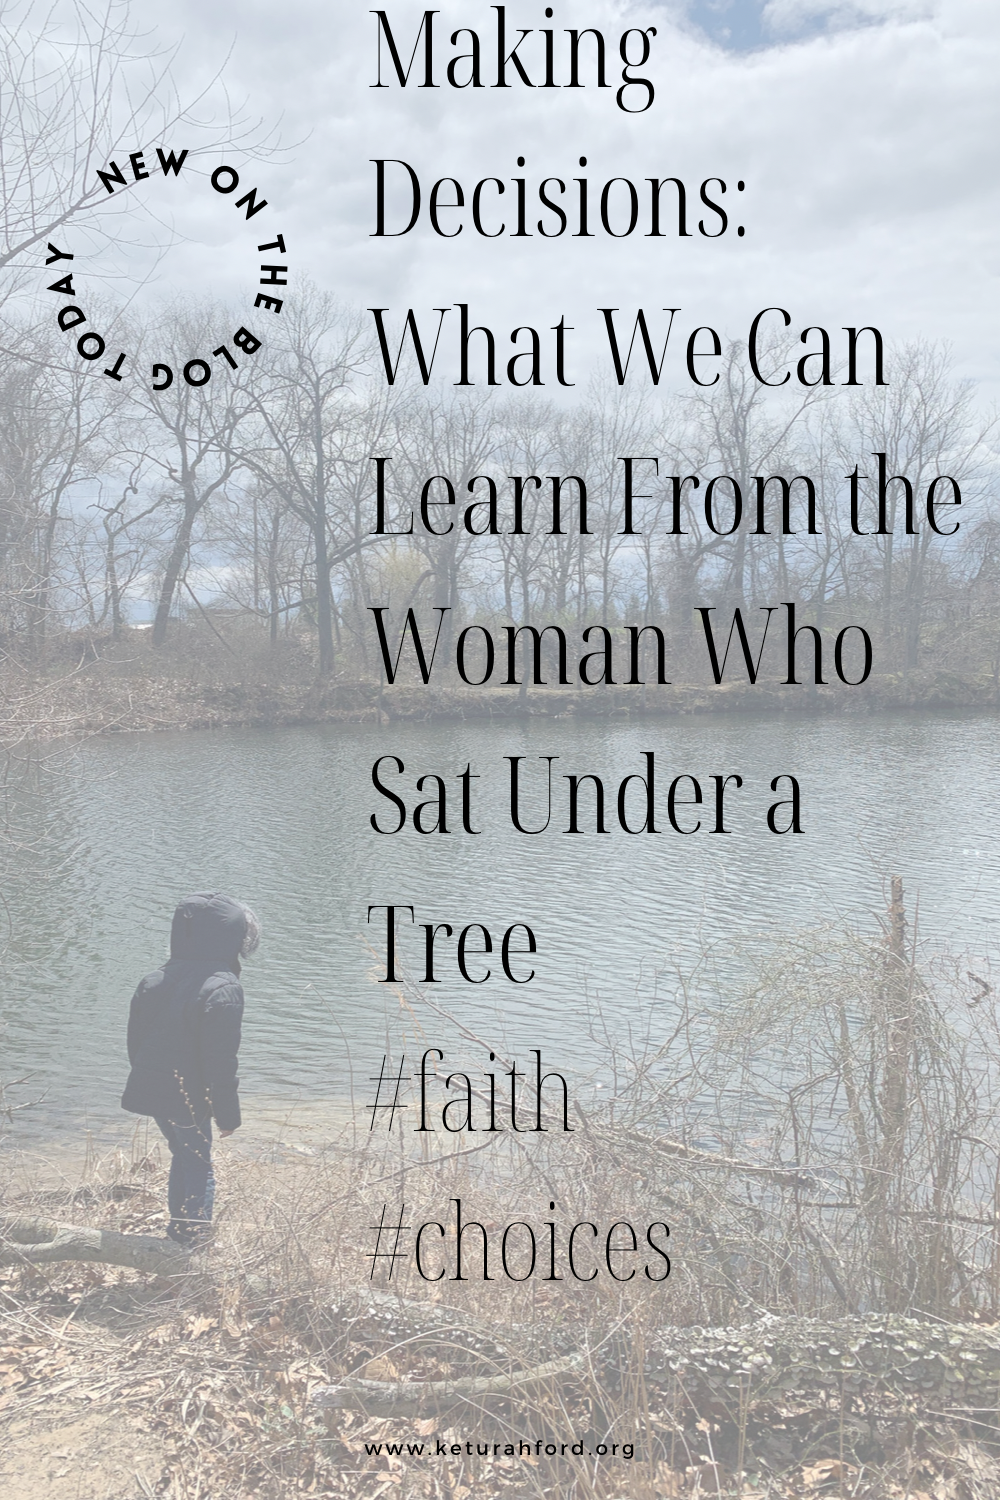 Making Decisions: What We Can Learn From the Woman Who Sat Under a Tree…